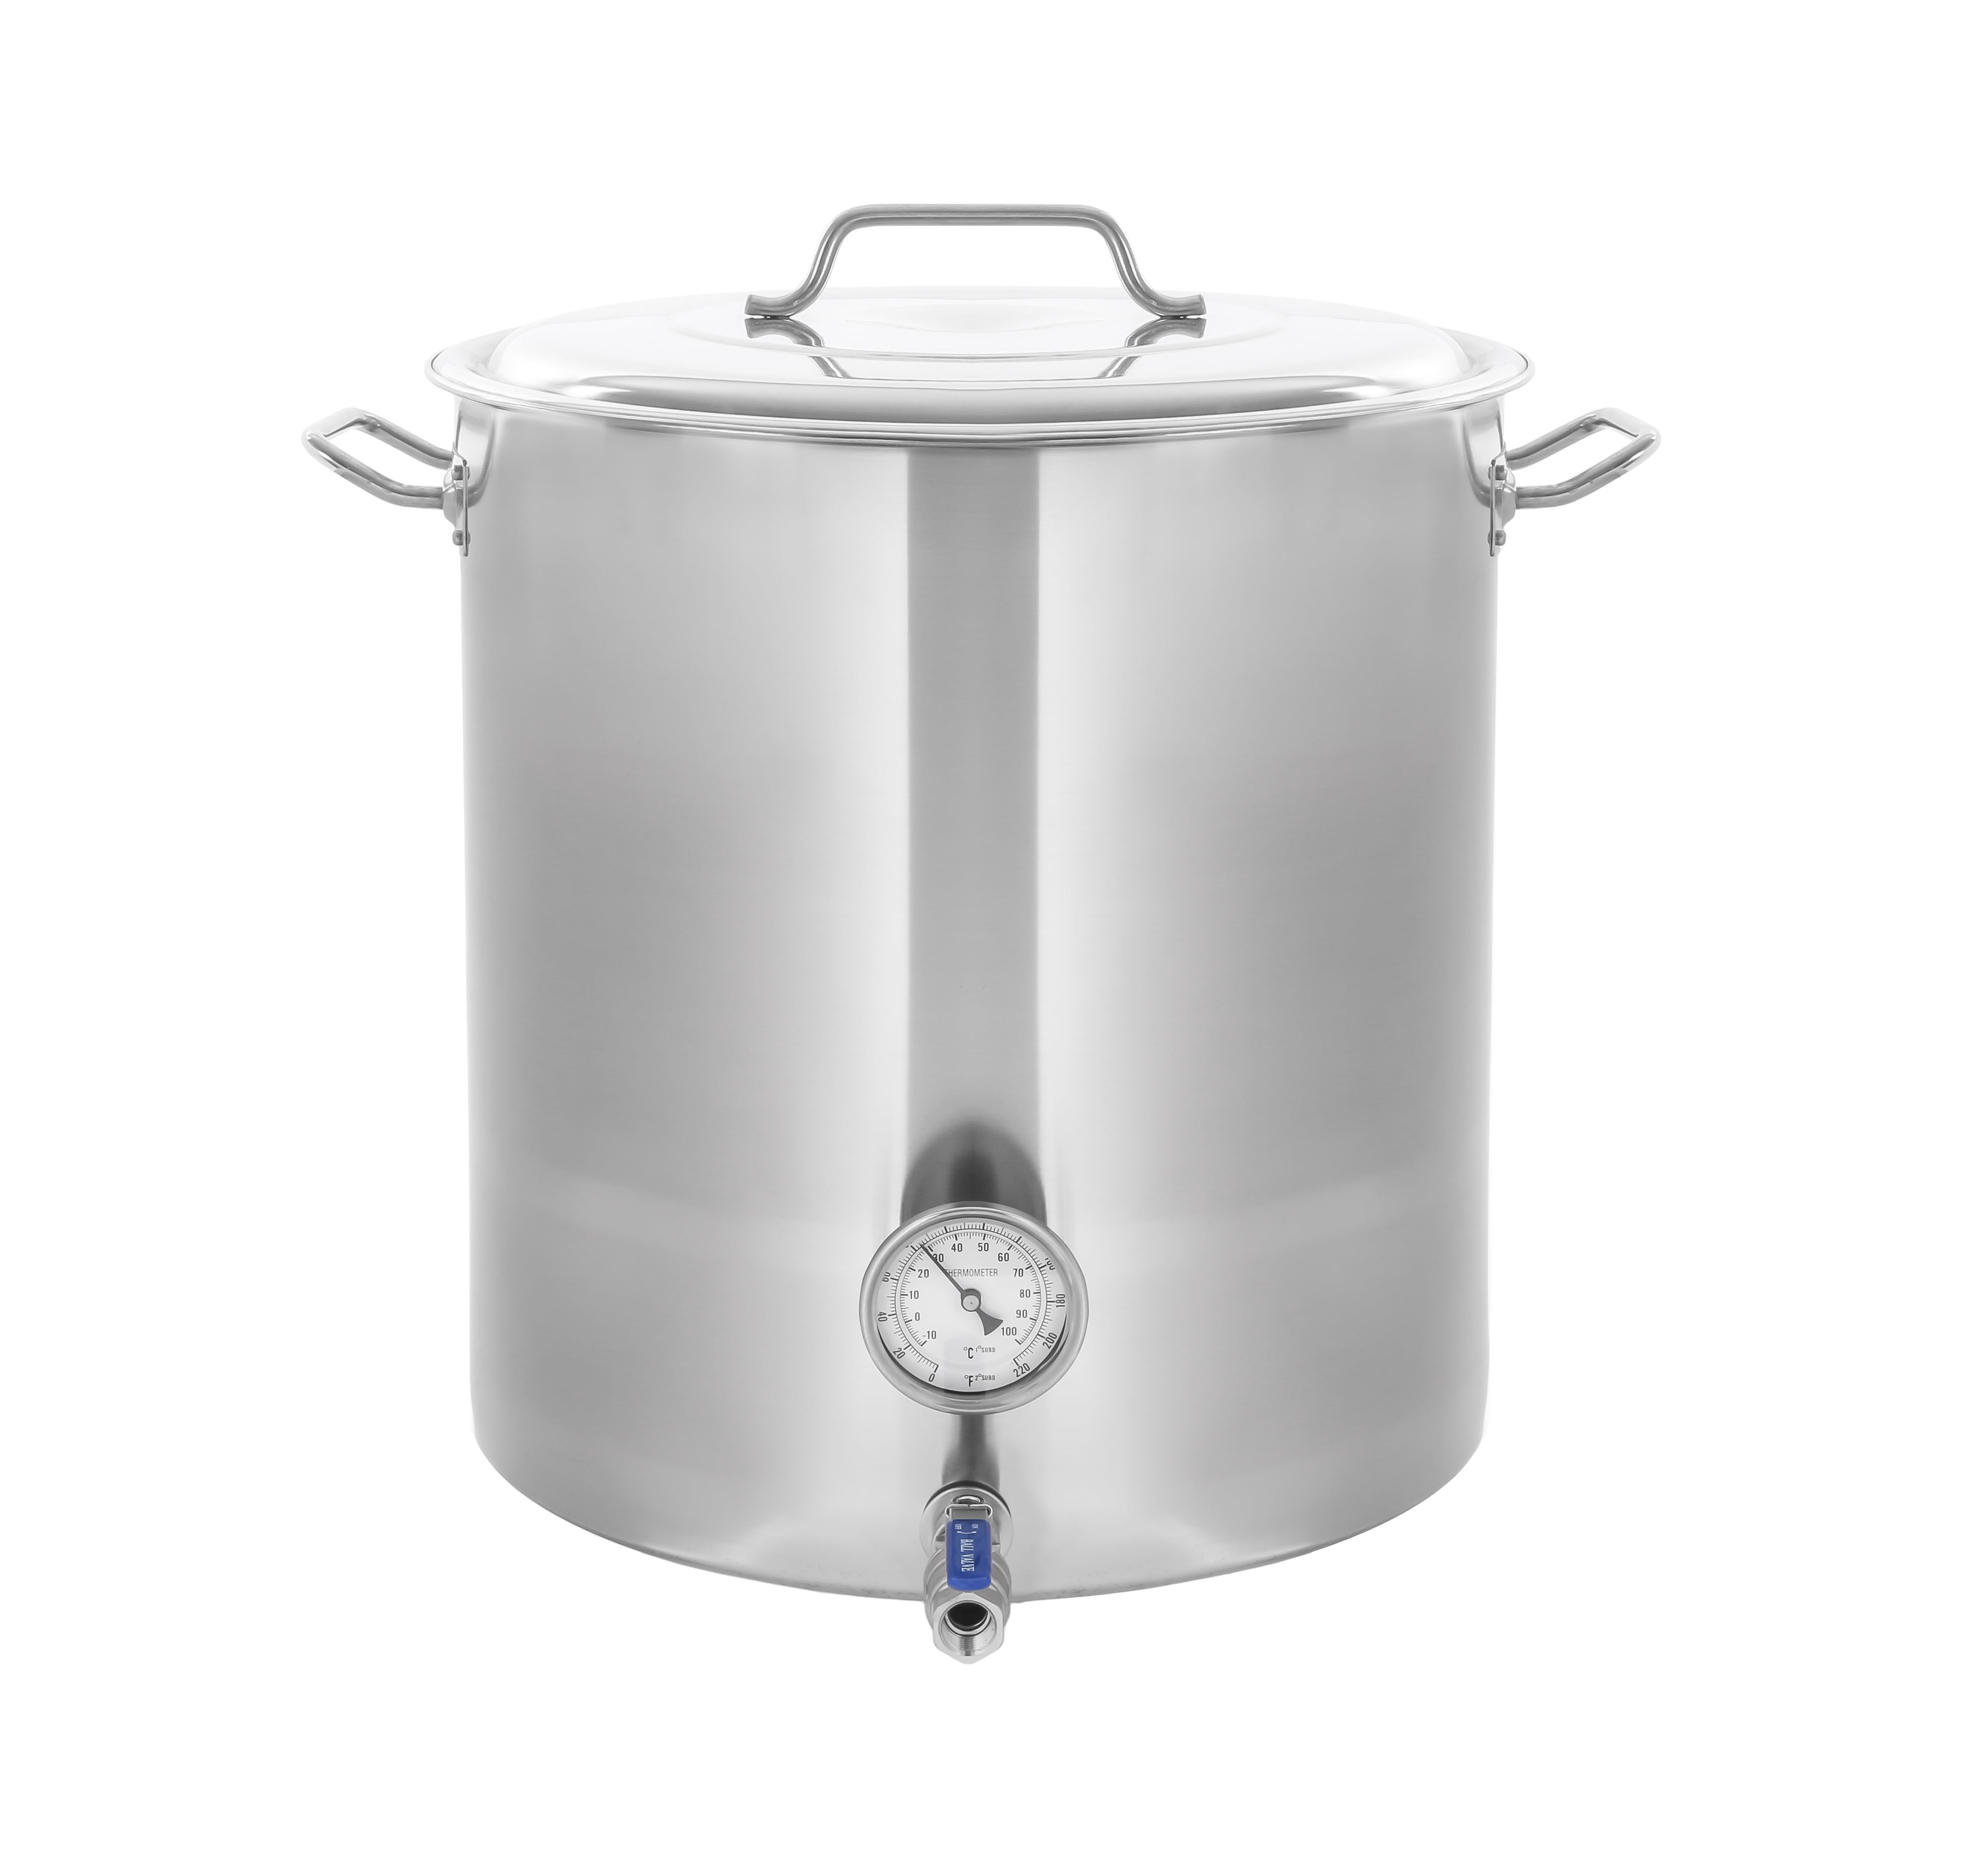 NEW 40 QT Quart Polished Stainless Steel Stock Pot Brewing Kettle Large w/ Lid 